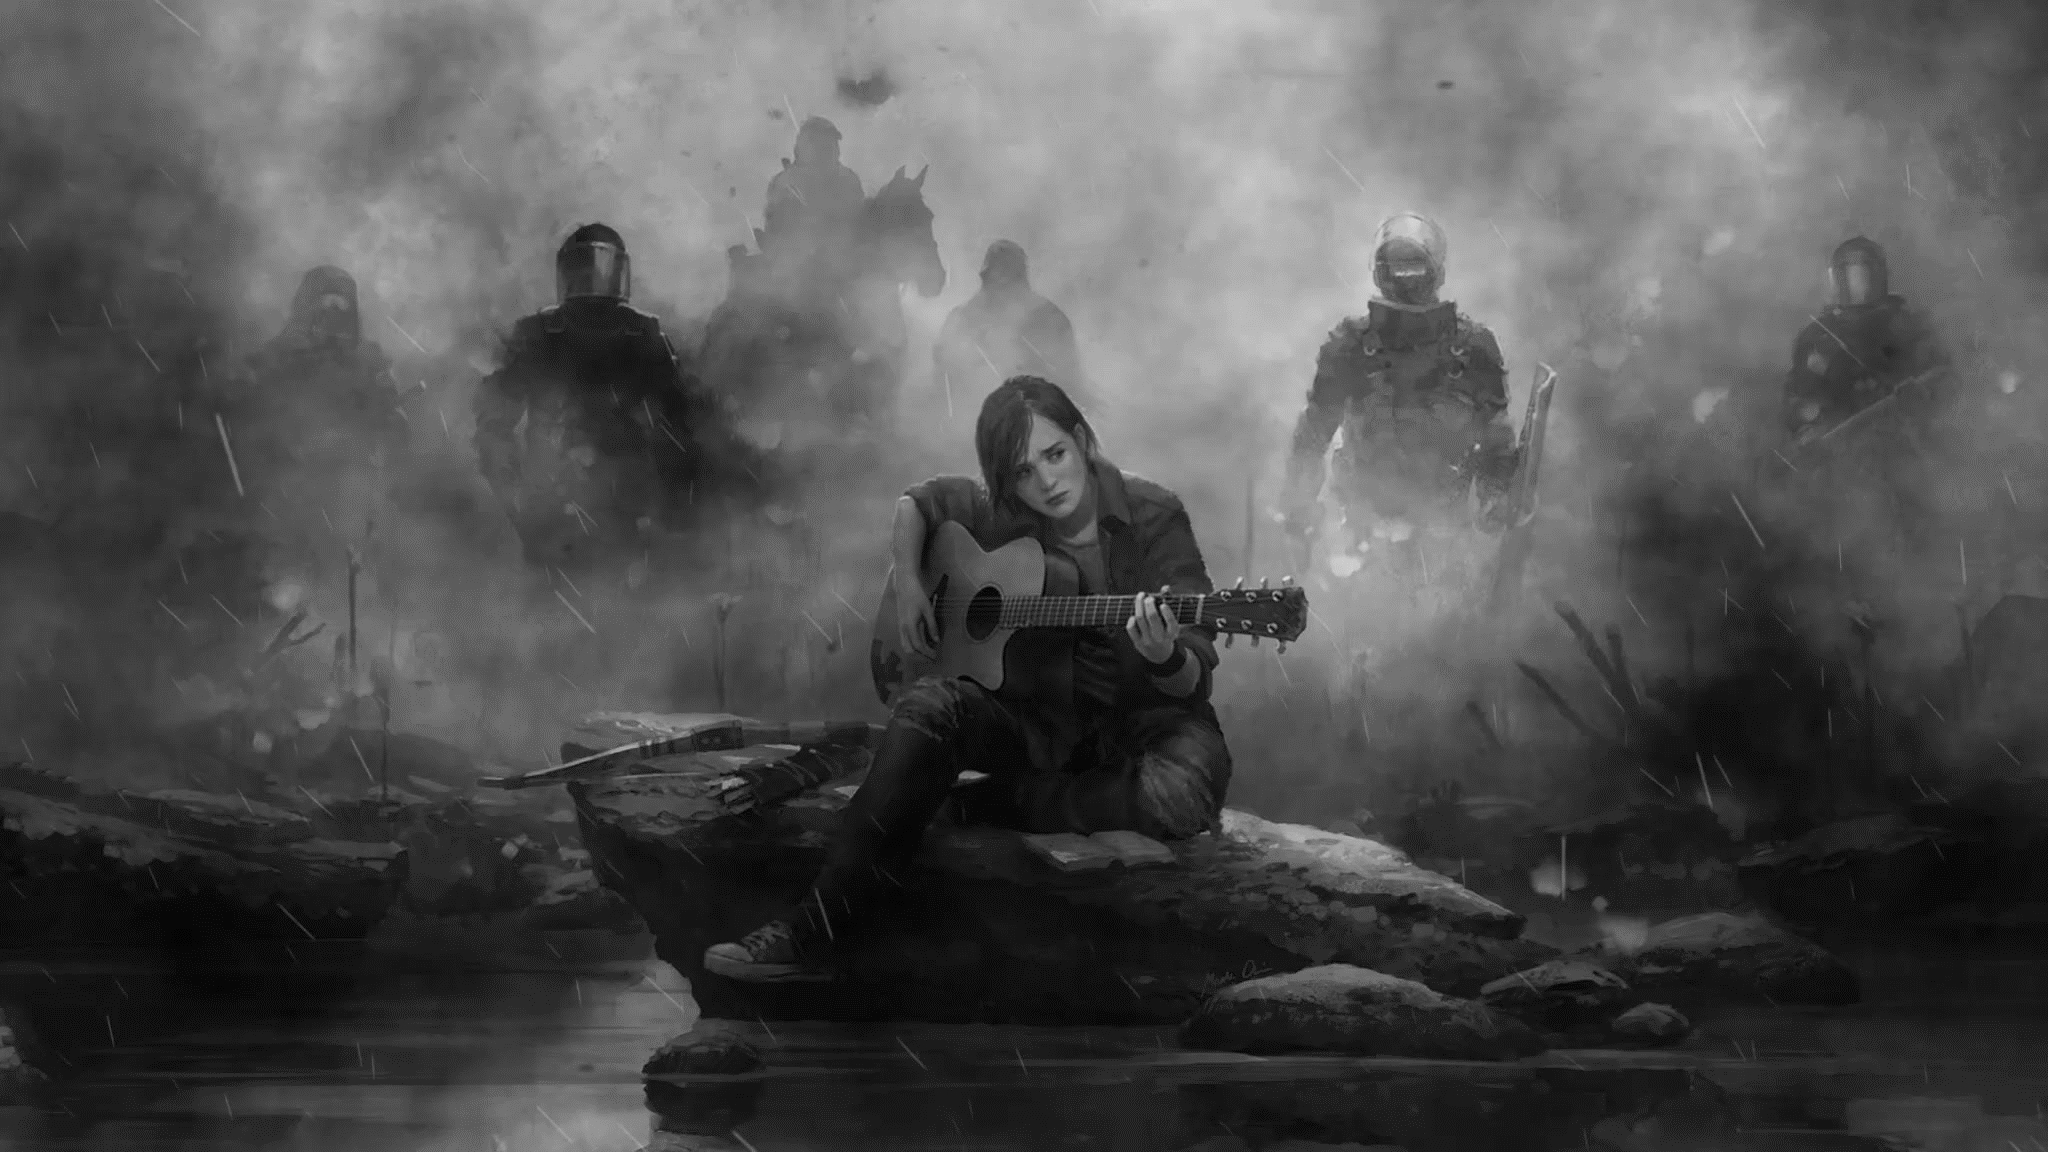 Ellie The Last Of Us Part 2 Guitar Monochrome Hd Games 4k Wallpapers Images Backgrounds Photos And Pictures